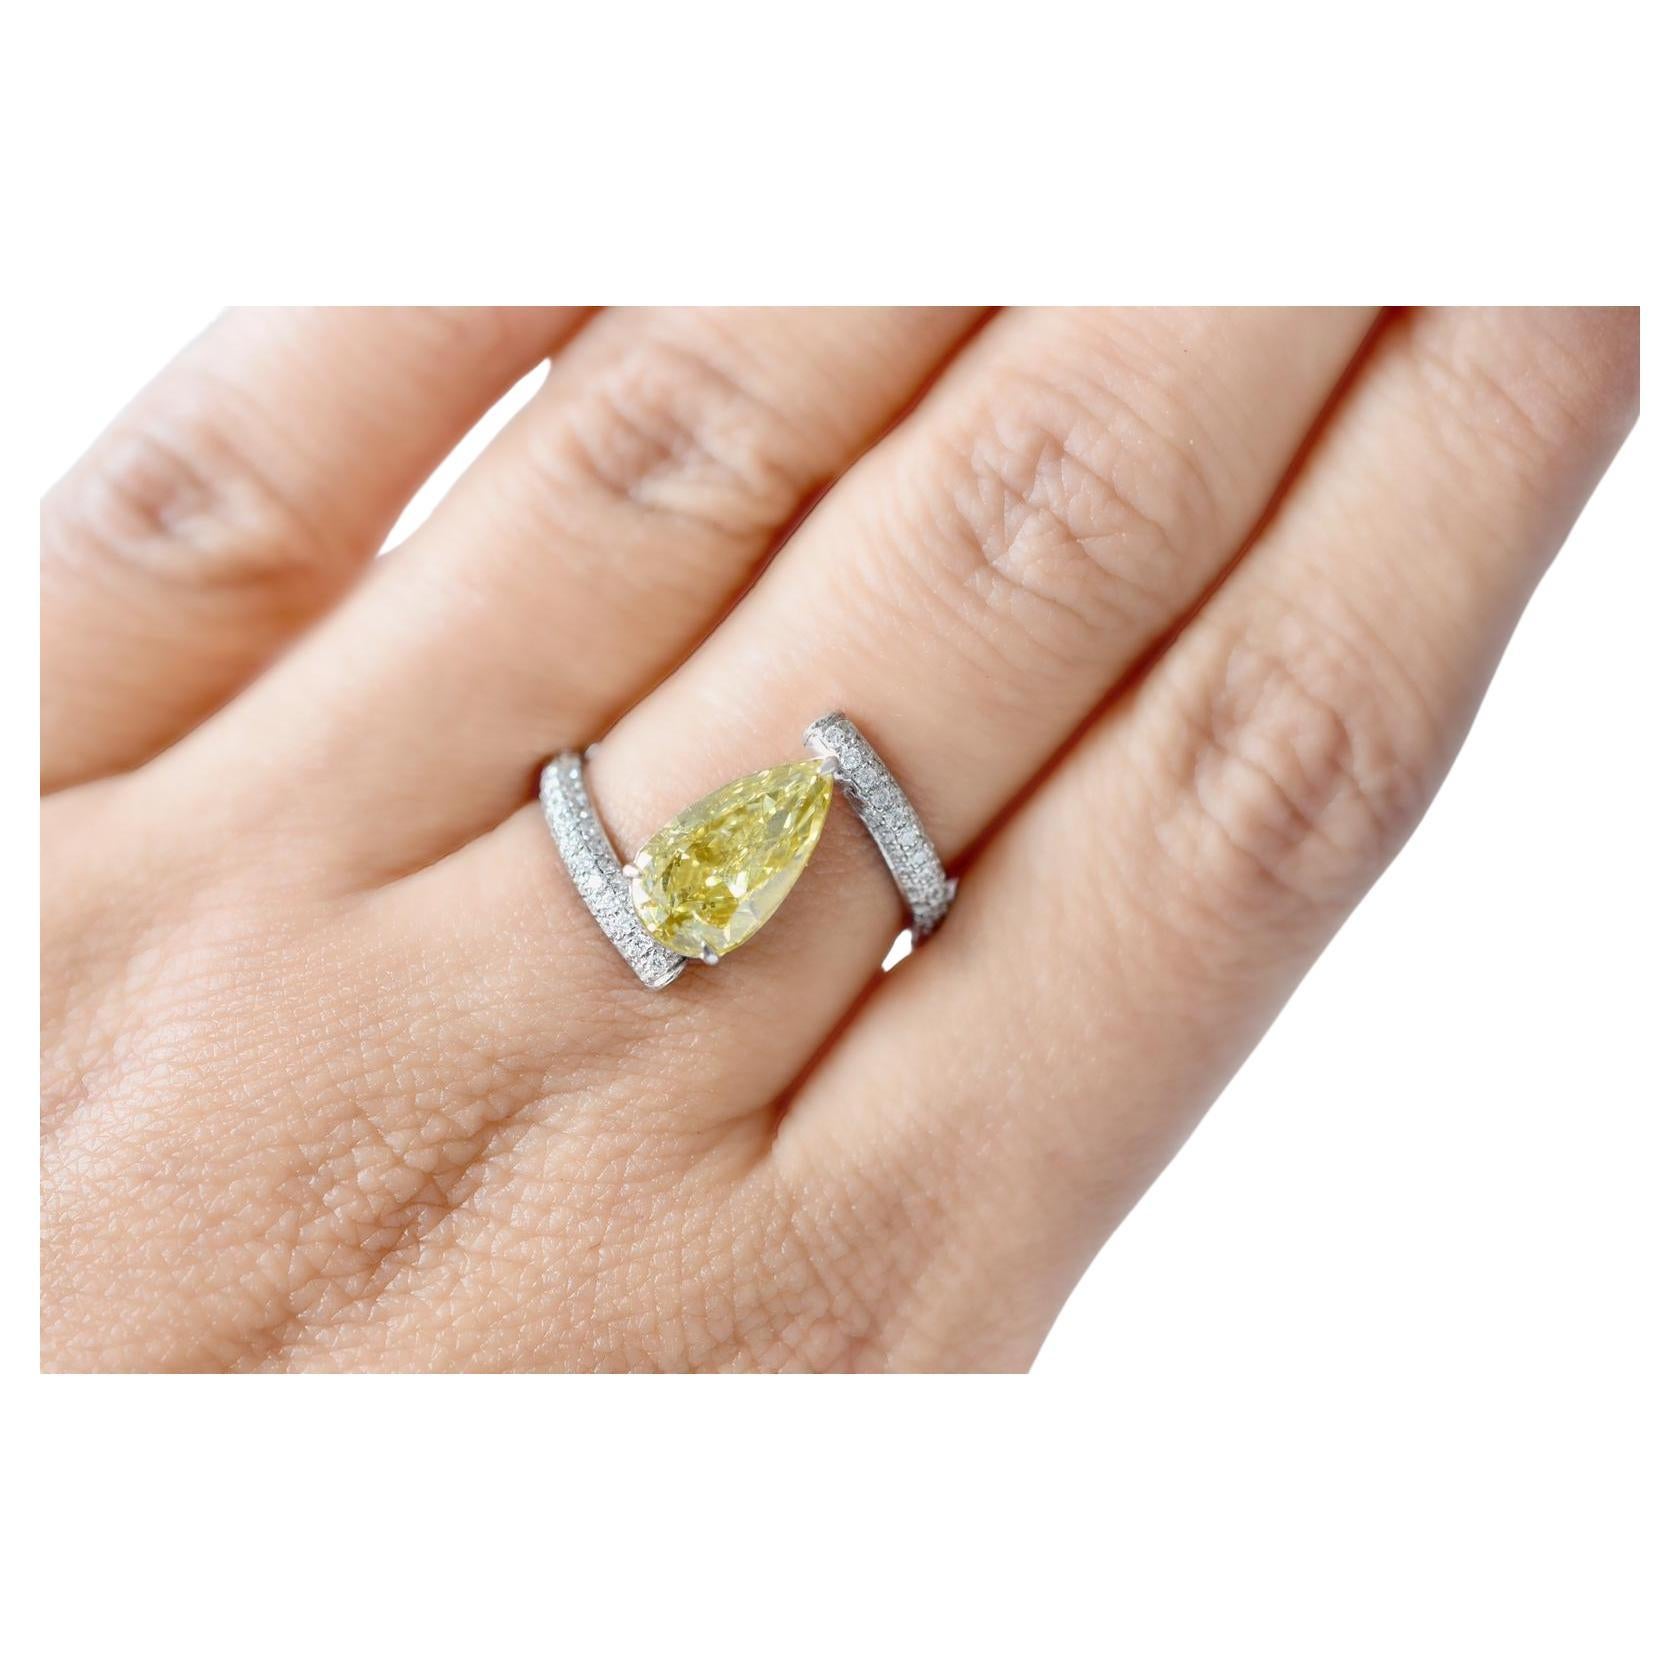 GIA Certified Fancy Intense Yellow Diamond Ring 2.01 Carat I1 Pear Shape Ring For Sale